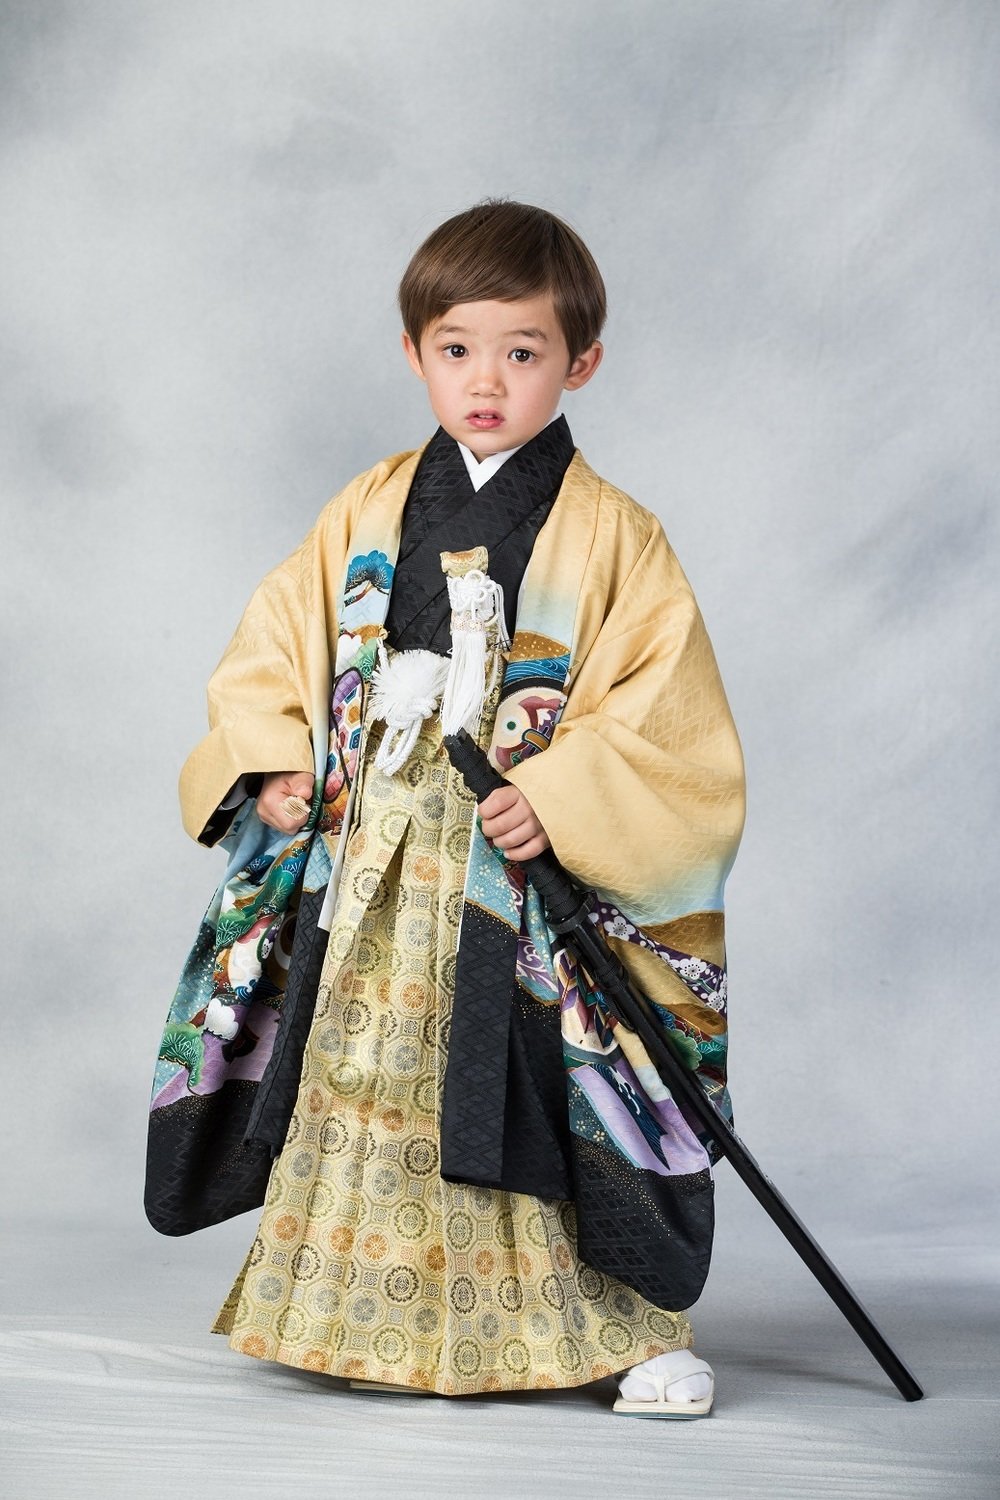 753 kimono rental for 5-year-old boy or 3-year-old boy , professional studio photo session include photo data